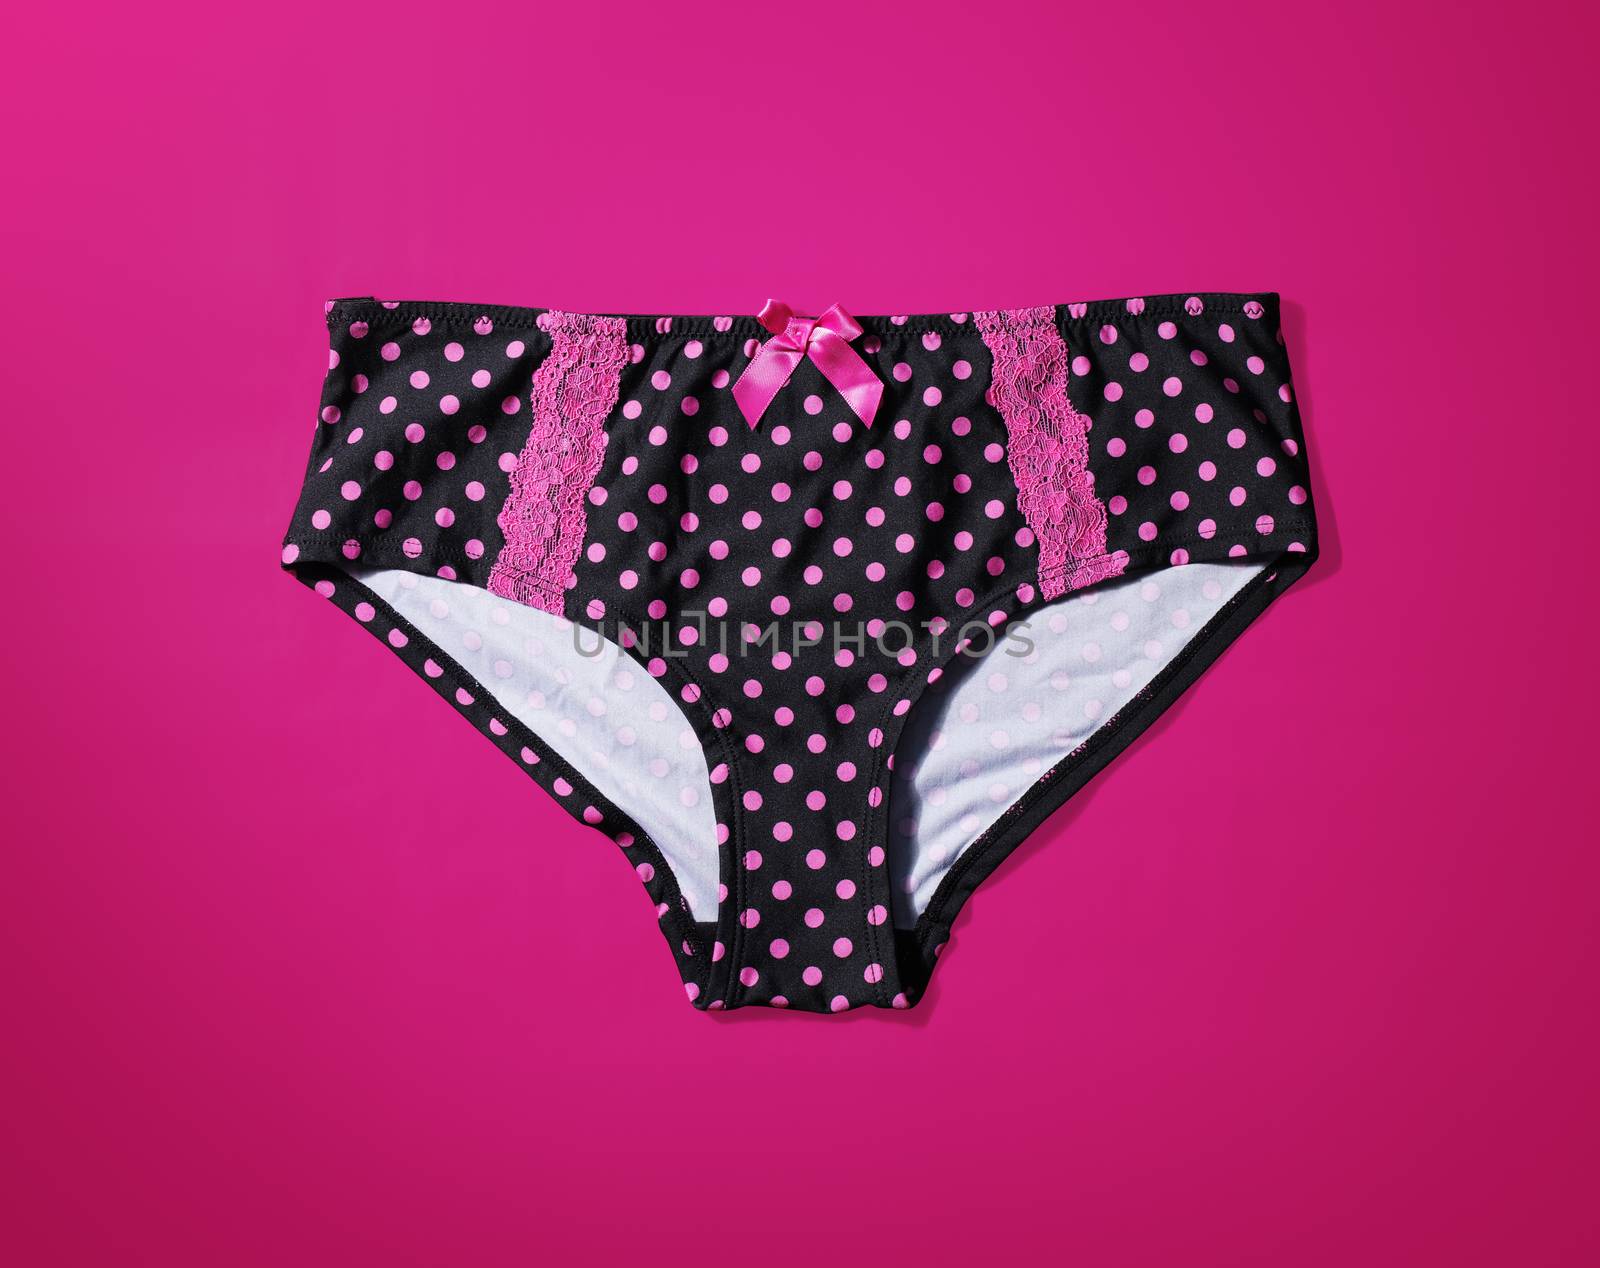 Women's black panties with pink polka dots on magenta background with natural shadows.